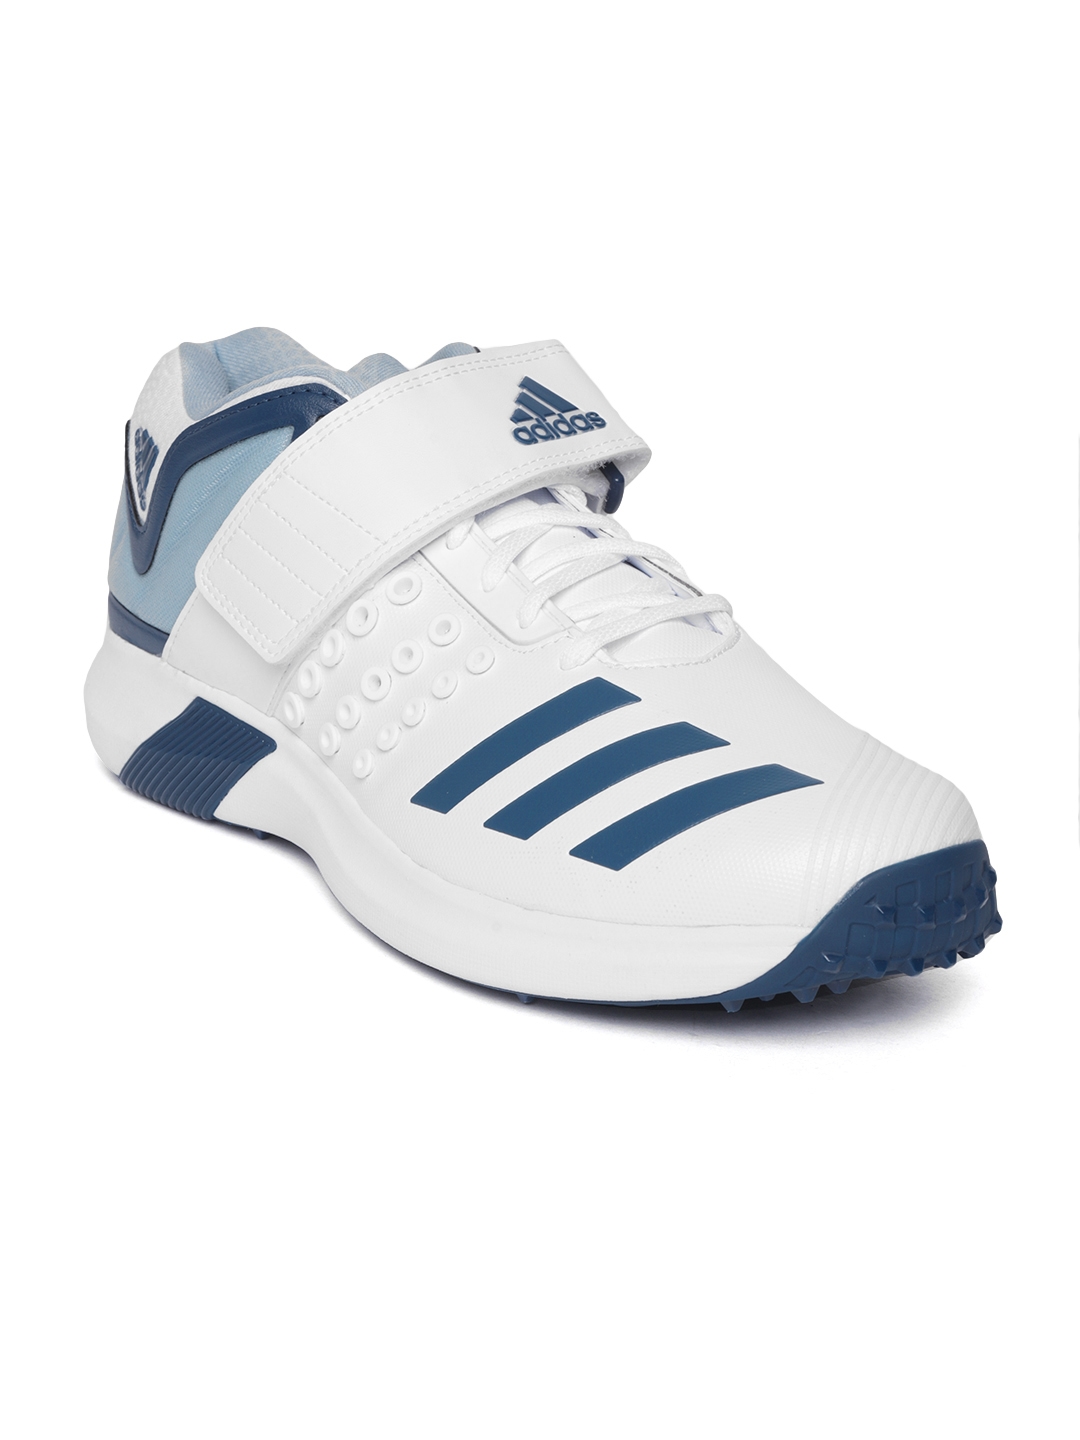 Adipower Vector Mid Cricket Shoes 